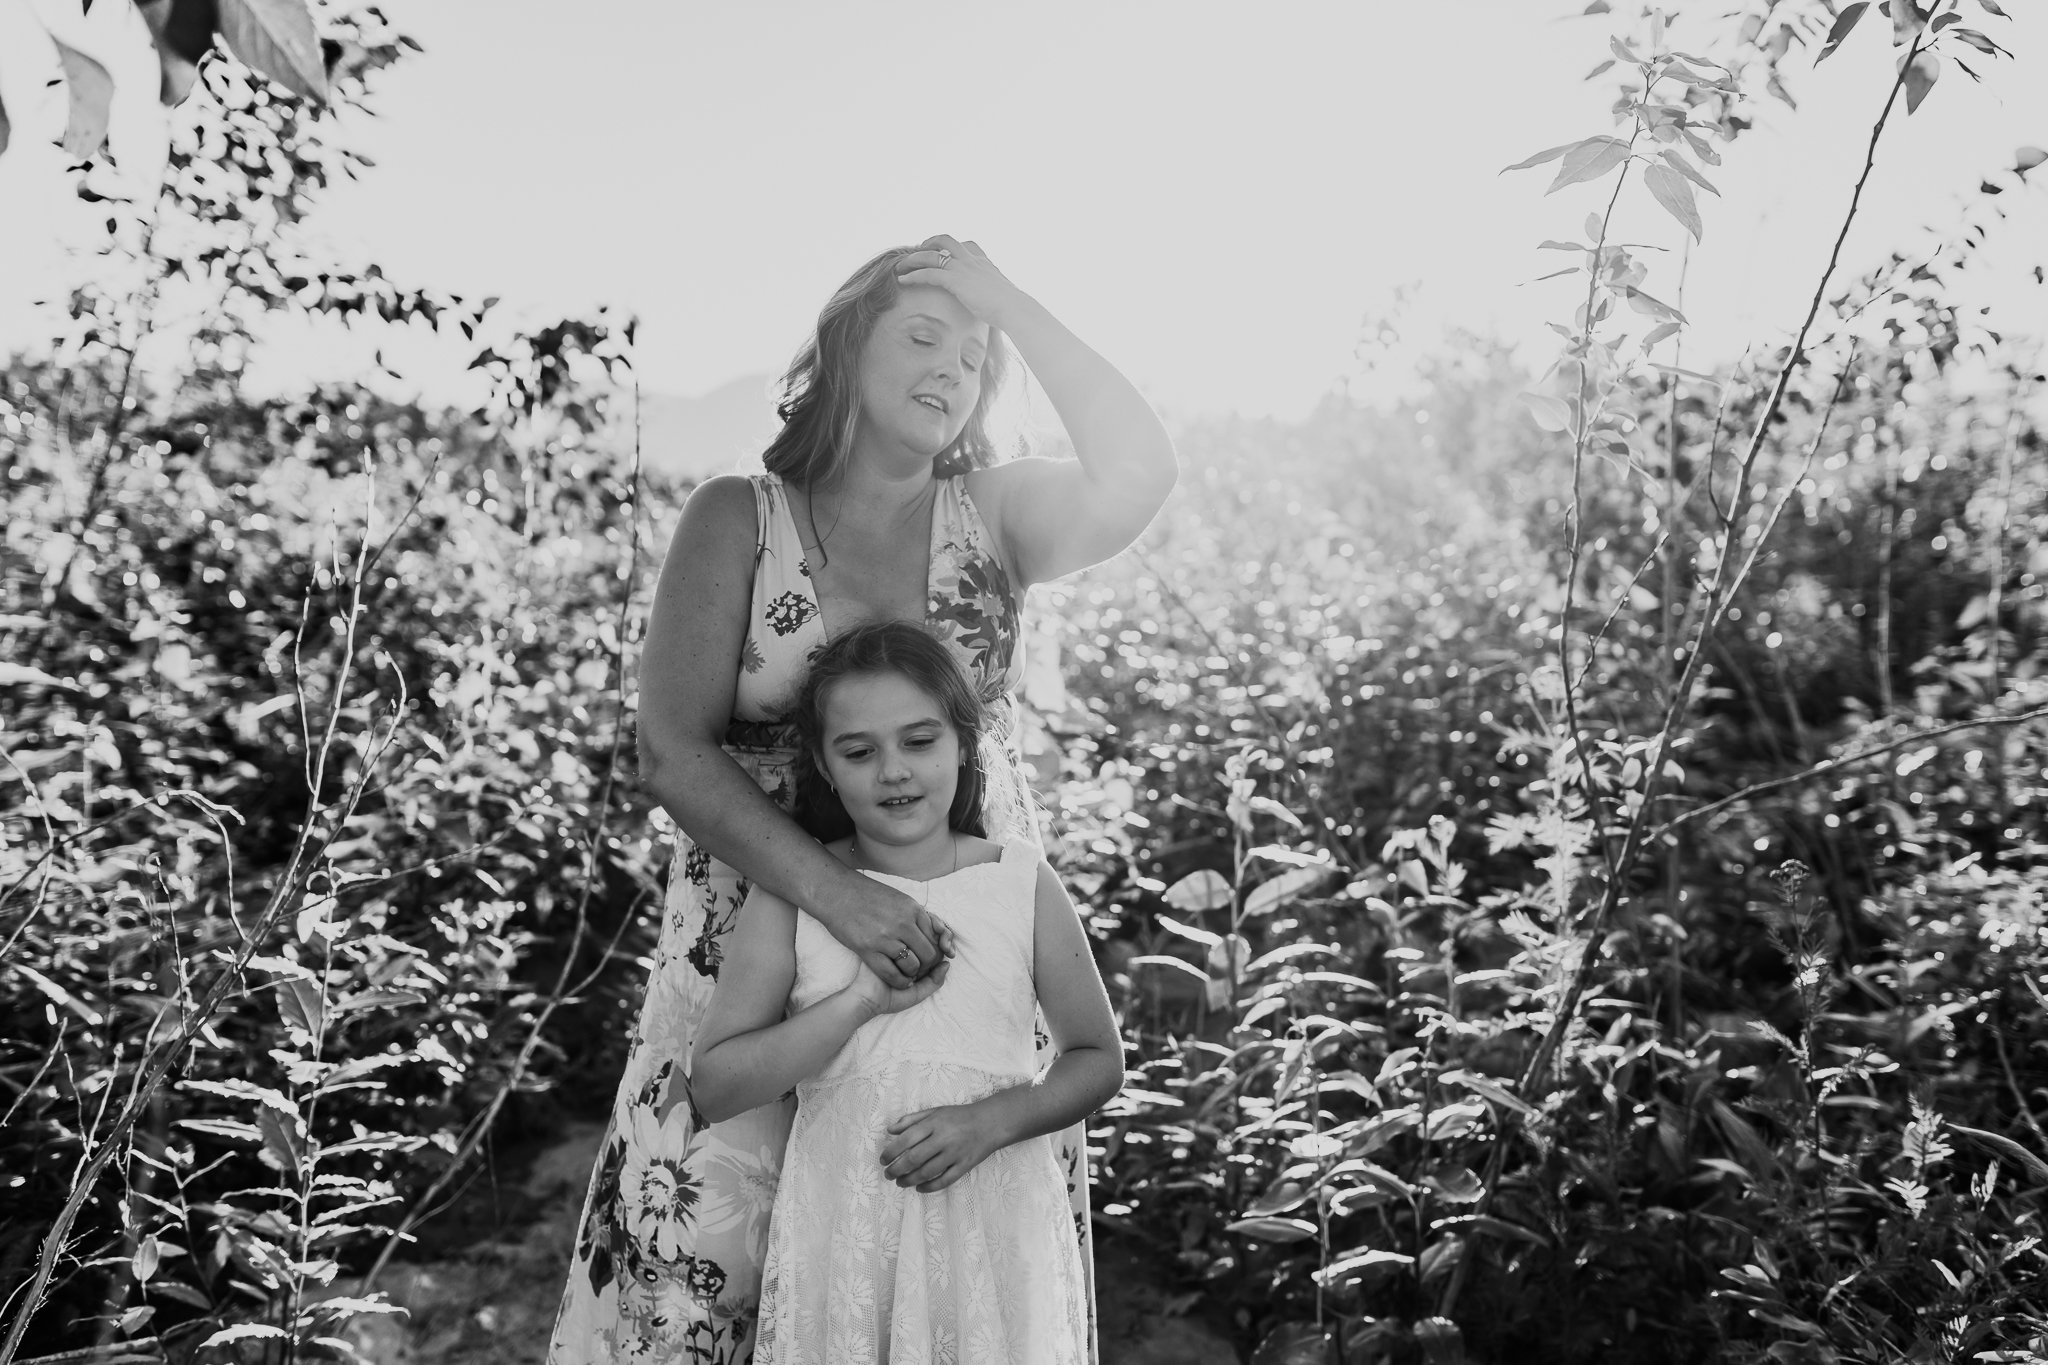 Vedder+River+Family+Session+-+Anna+Hurley+Photography++(19).jpg